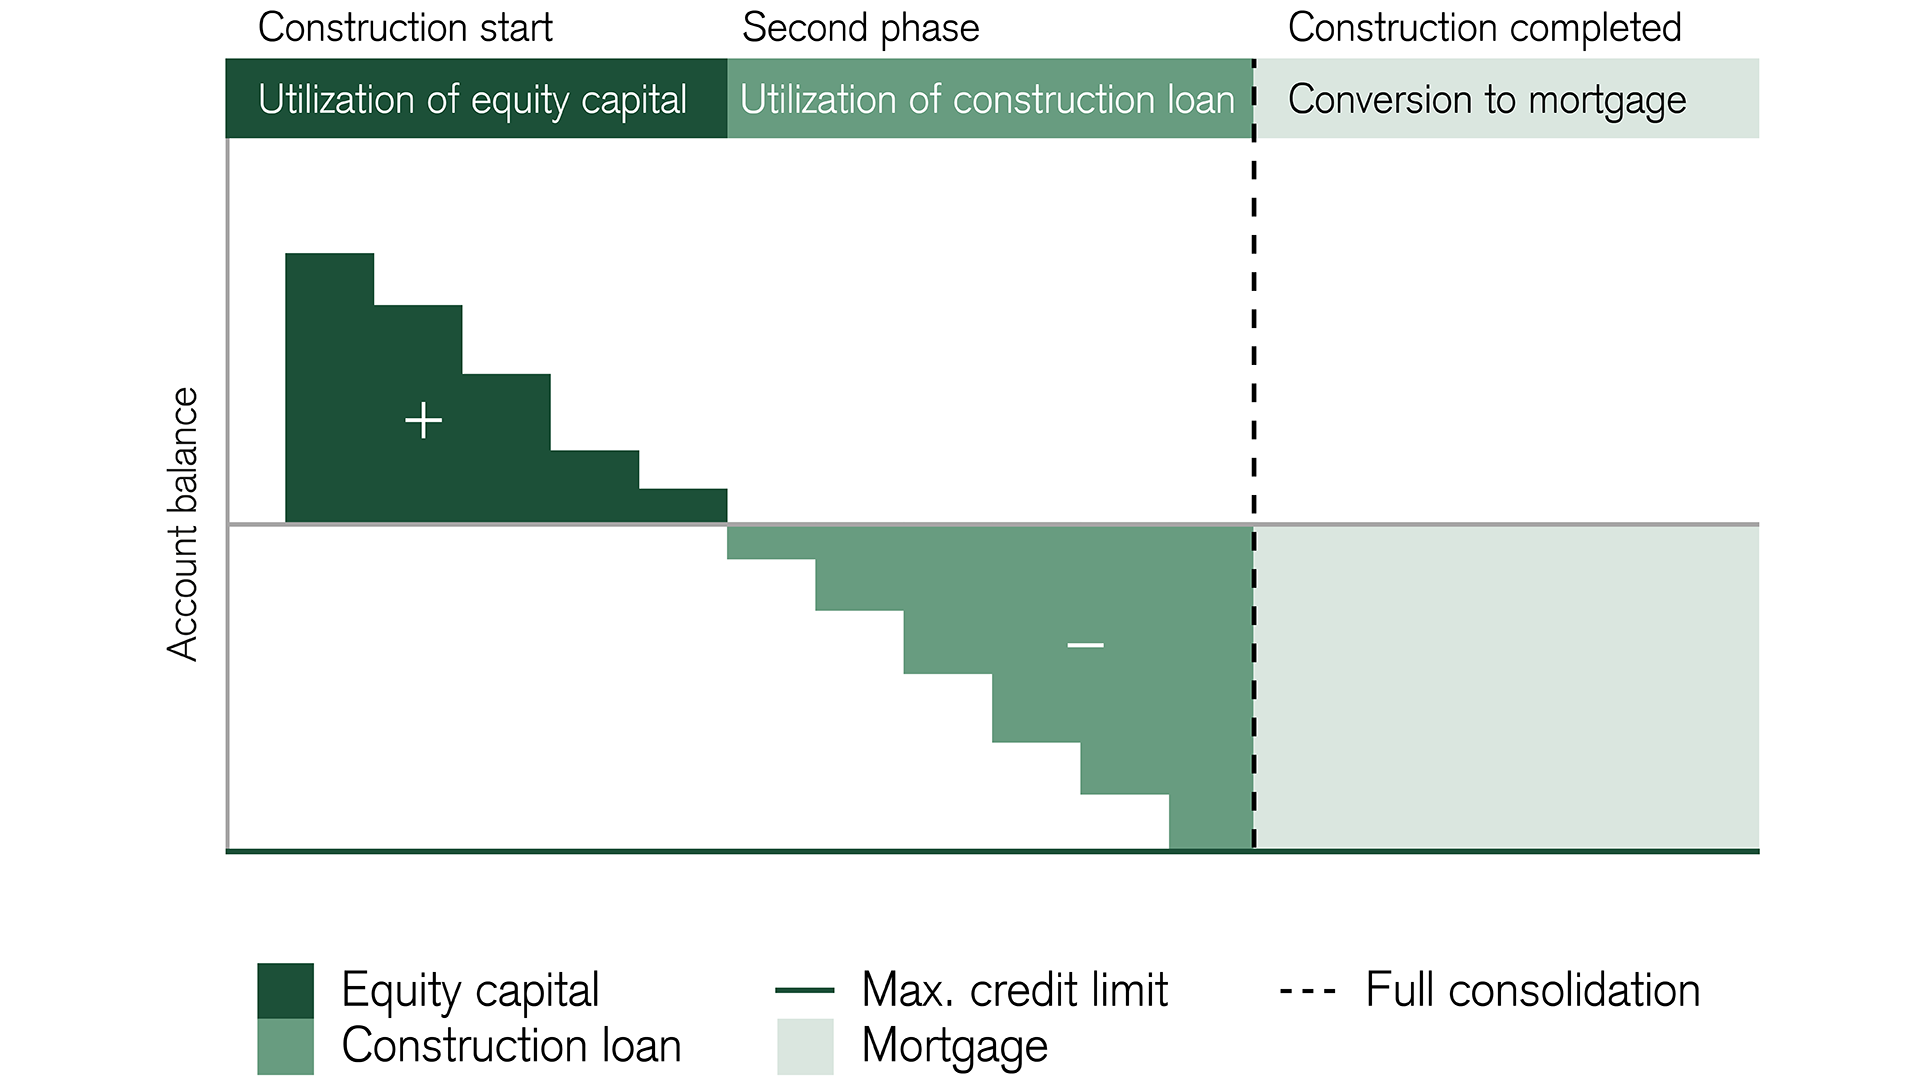 How construction financing works using a construction loan and full consolidation